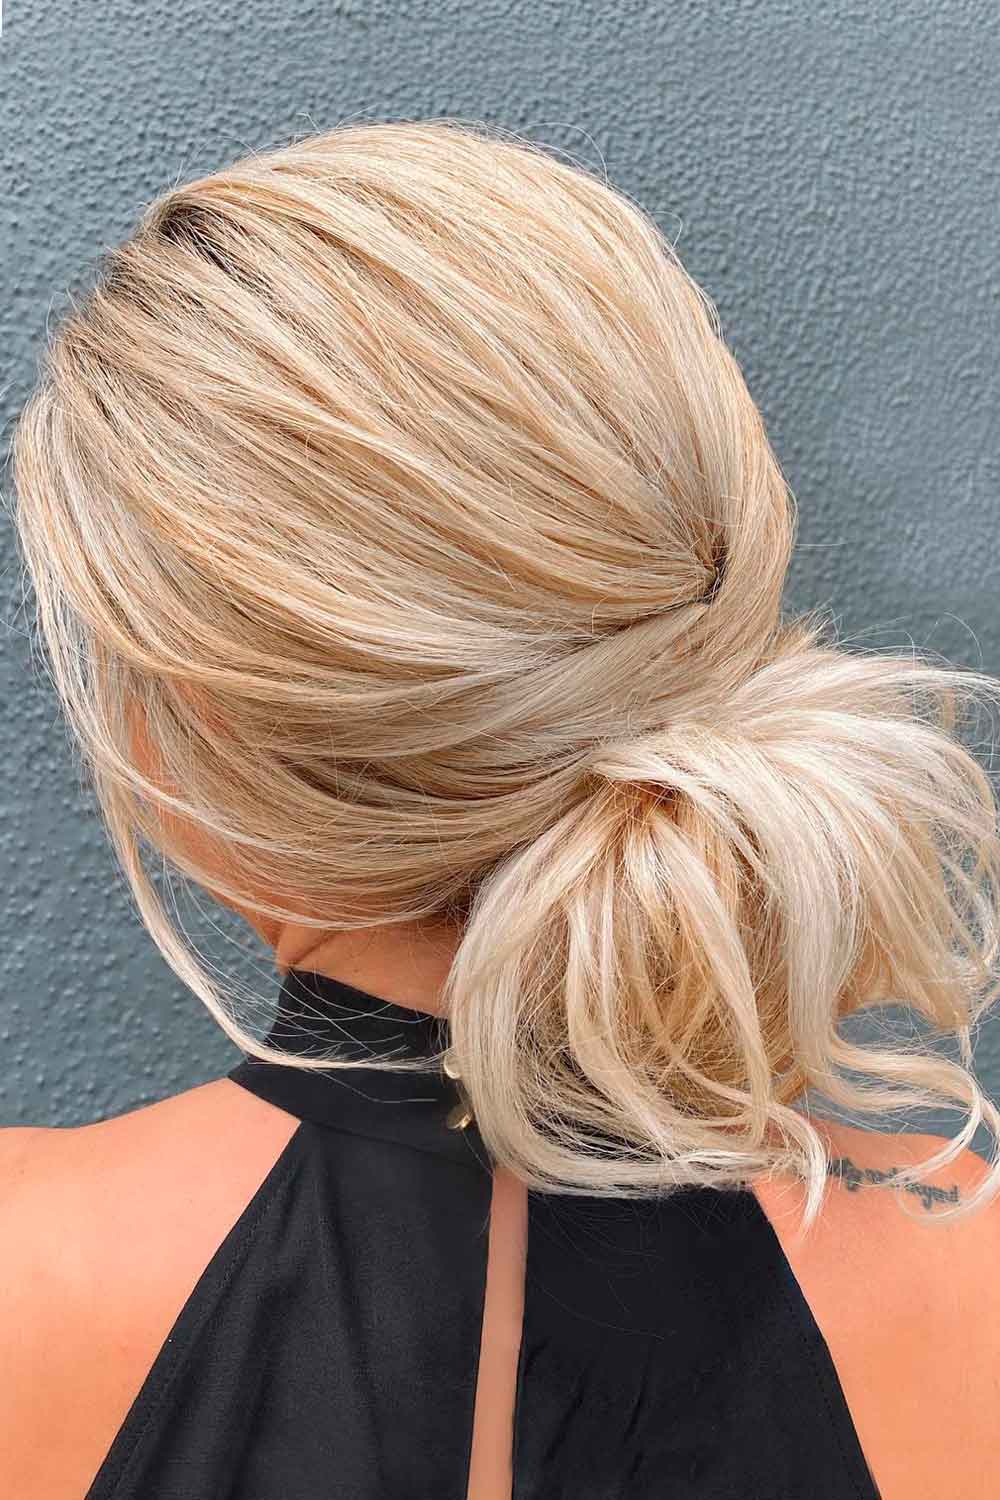 Bun Hairstyles For Prom Night